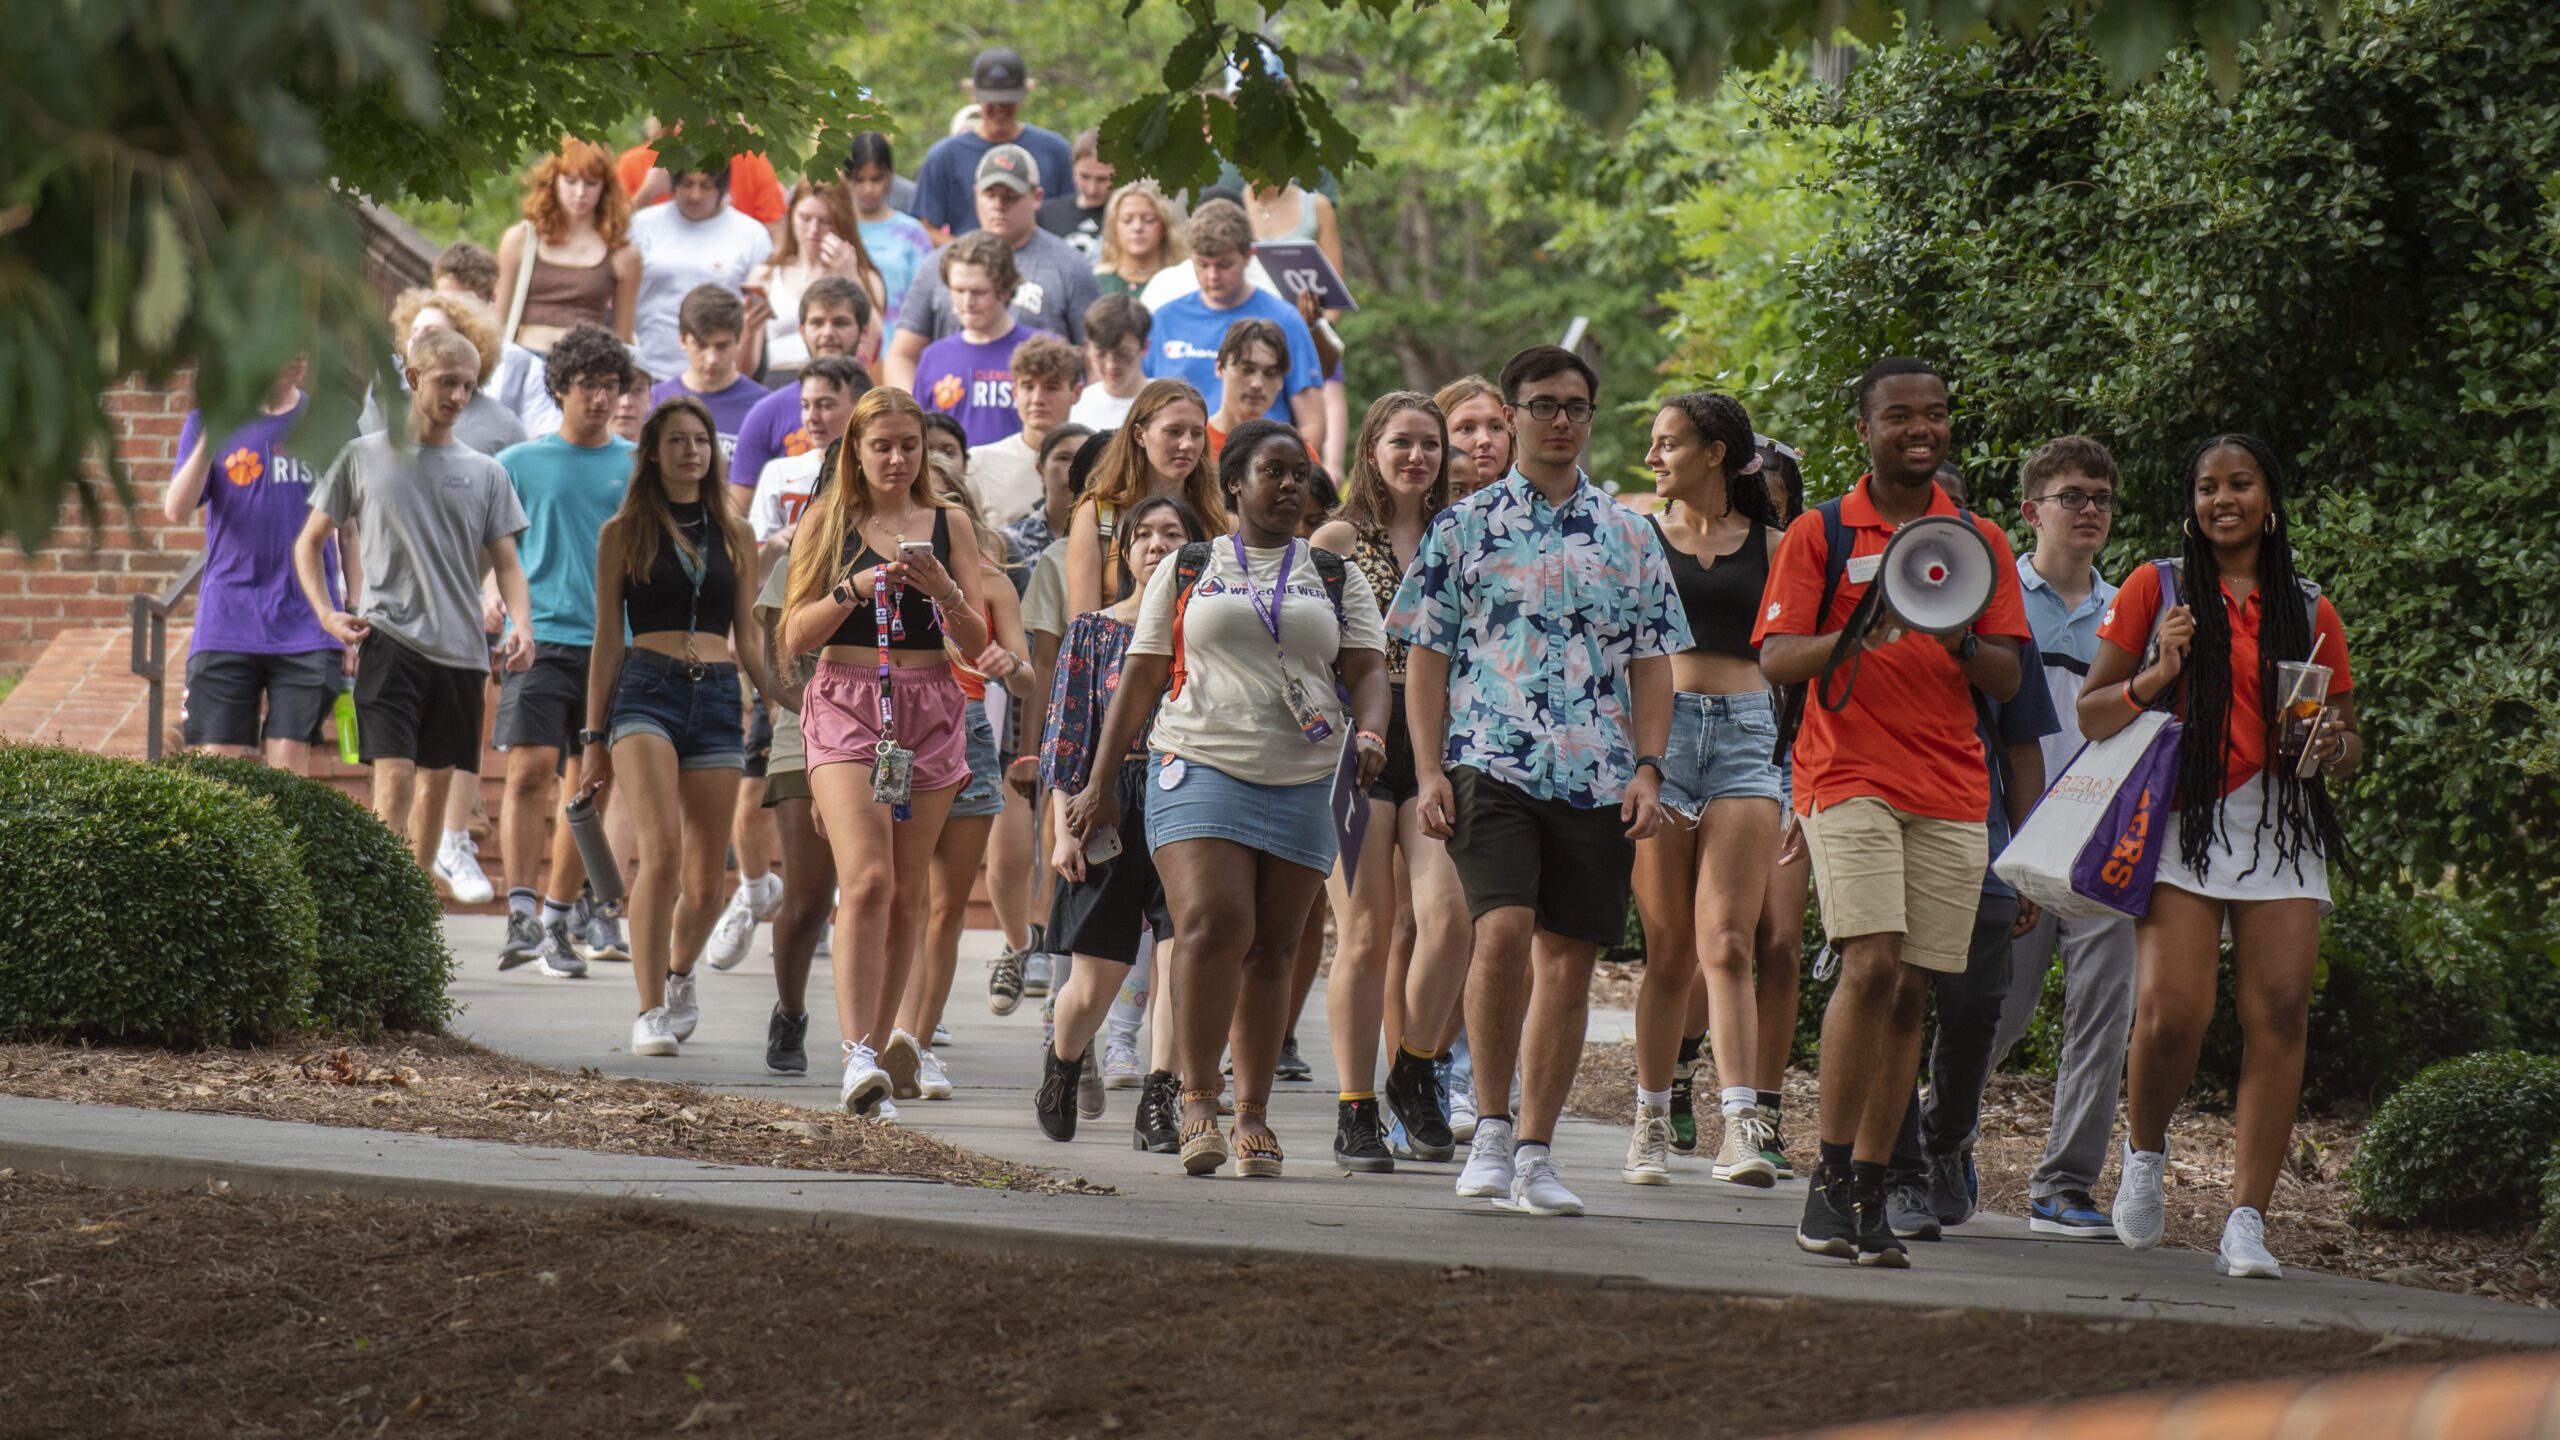 Central Spirit traditions as part of Welcome Week 2022